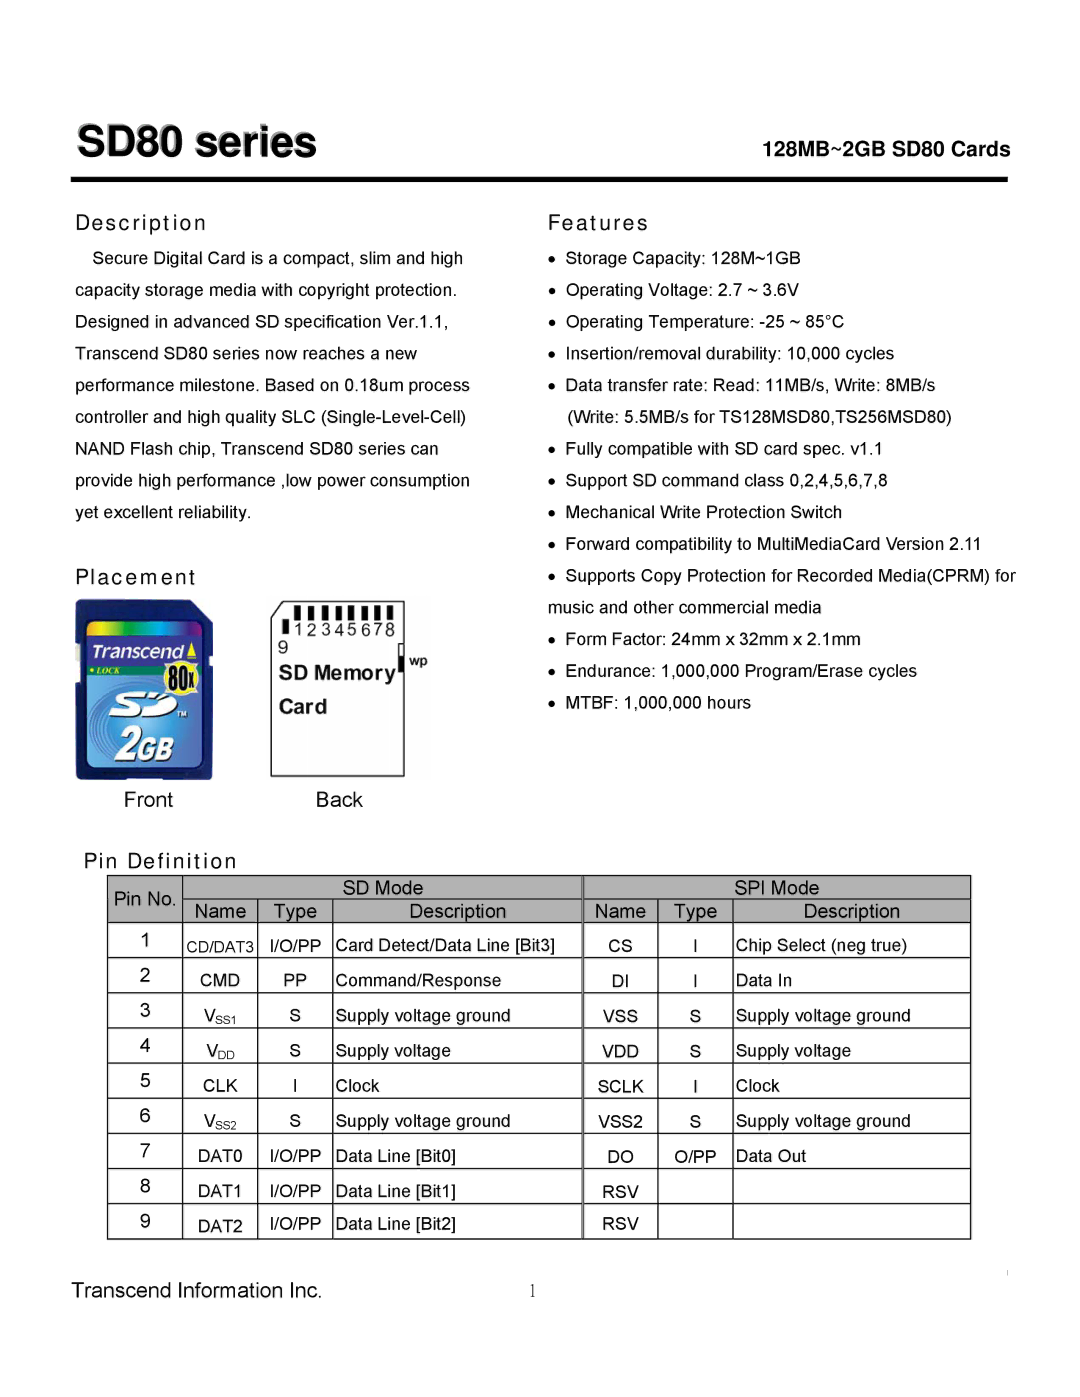 Transcend Information manual 128MB~2GB SD80 Cards Description Features, Placement, Pin Definition 